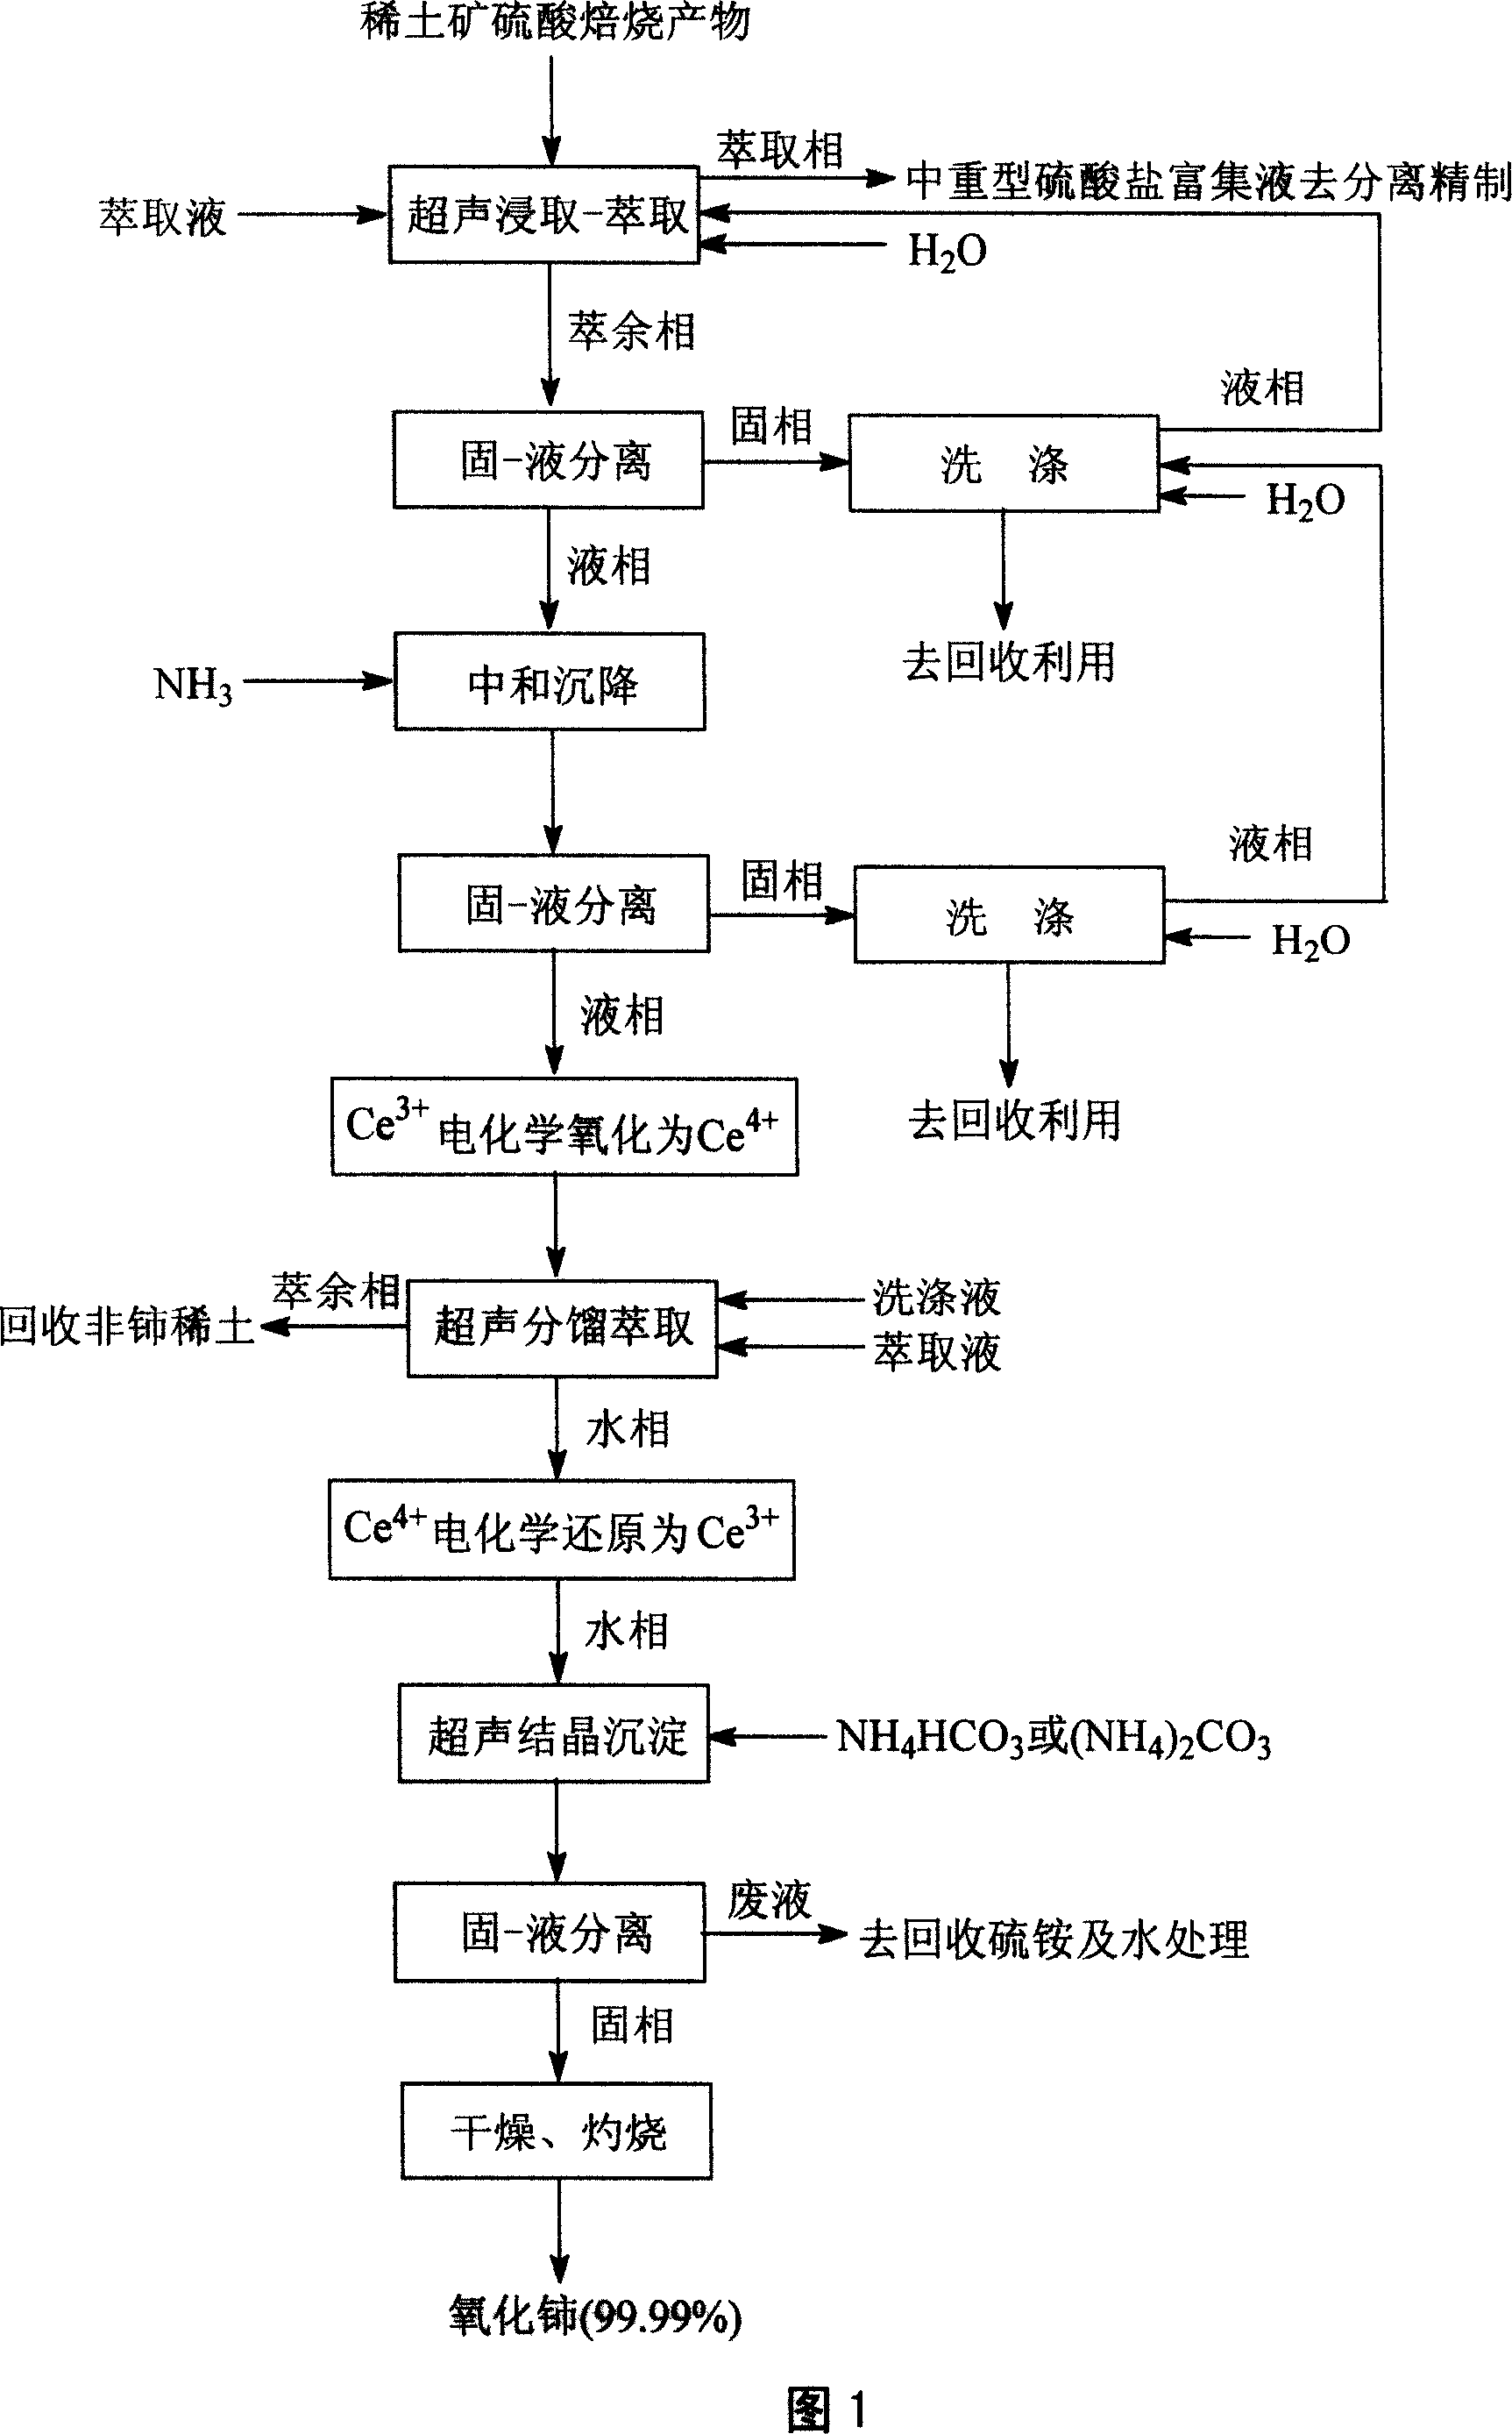 Method for preparing superfine high-purity cerium oxide by using rear earth ore sulfuric acid calcination products